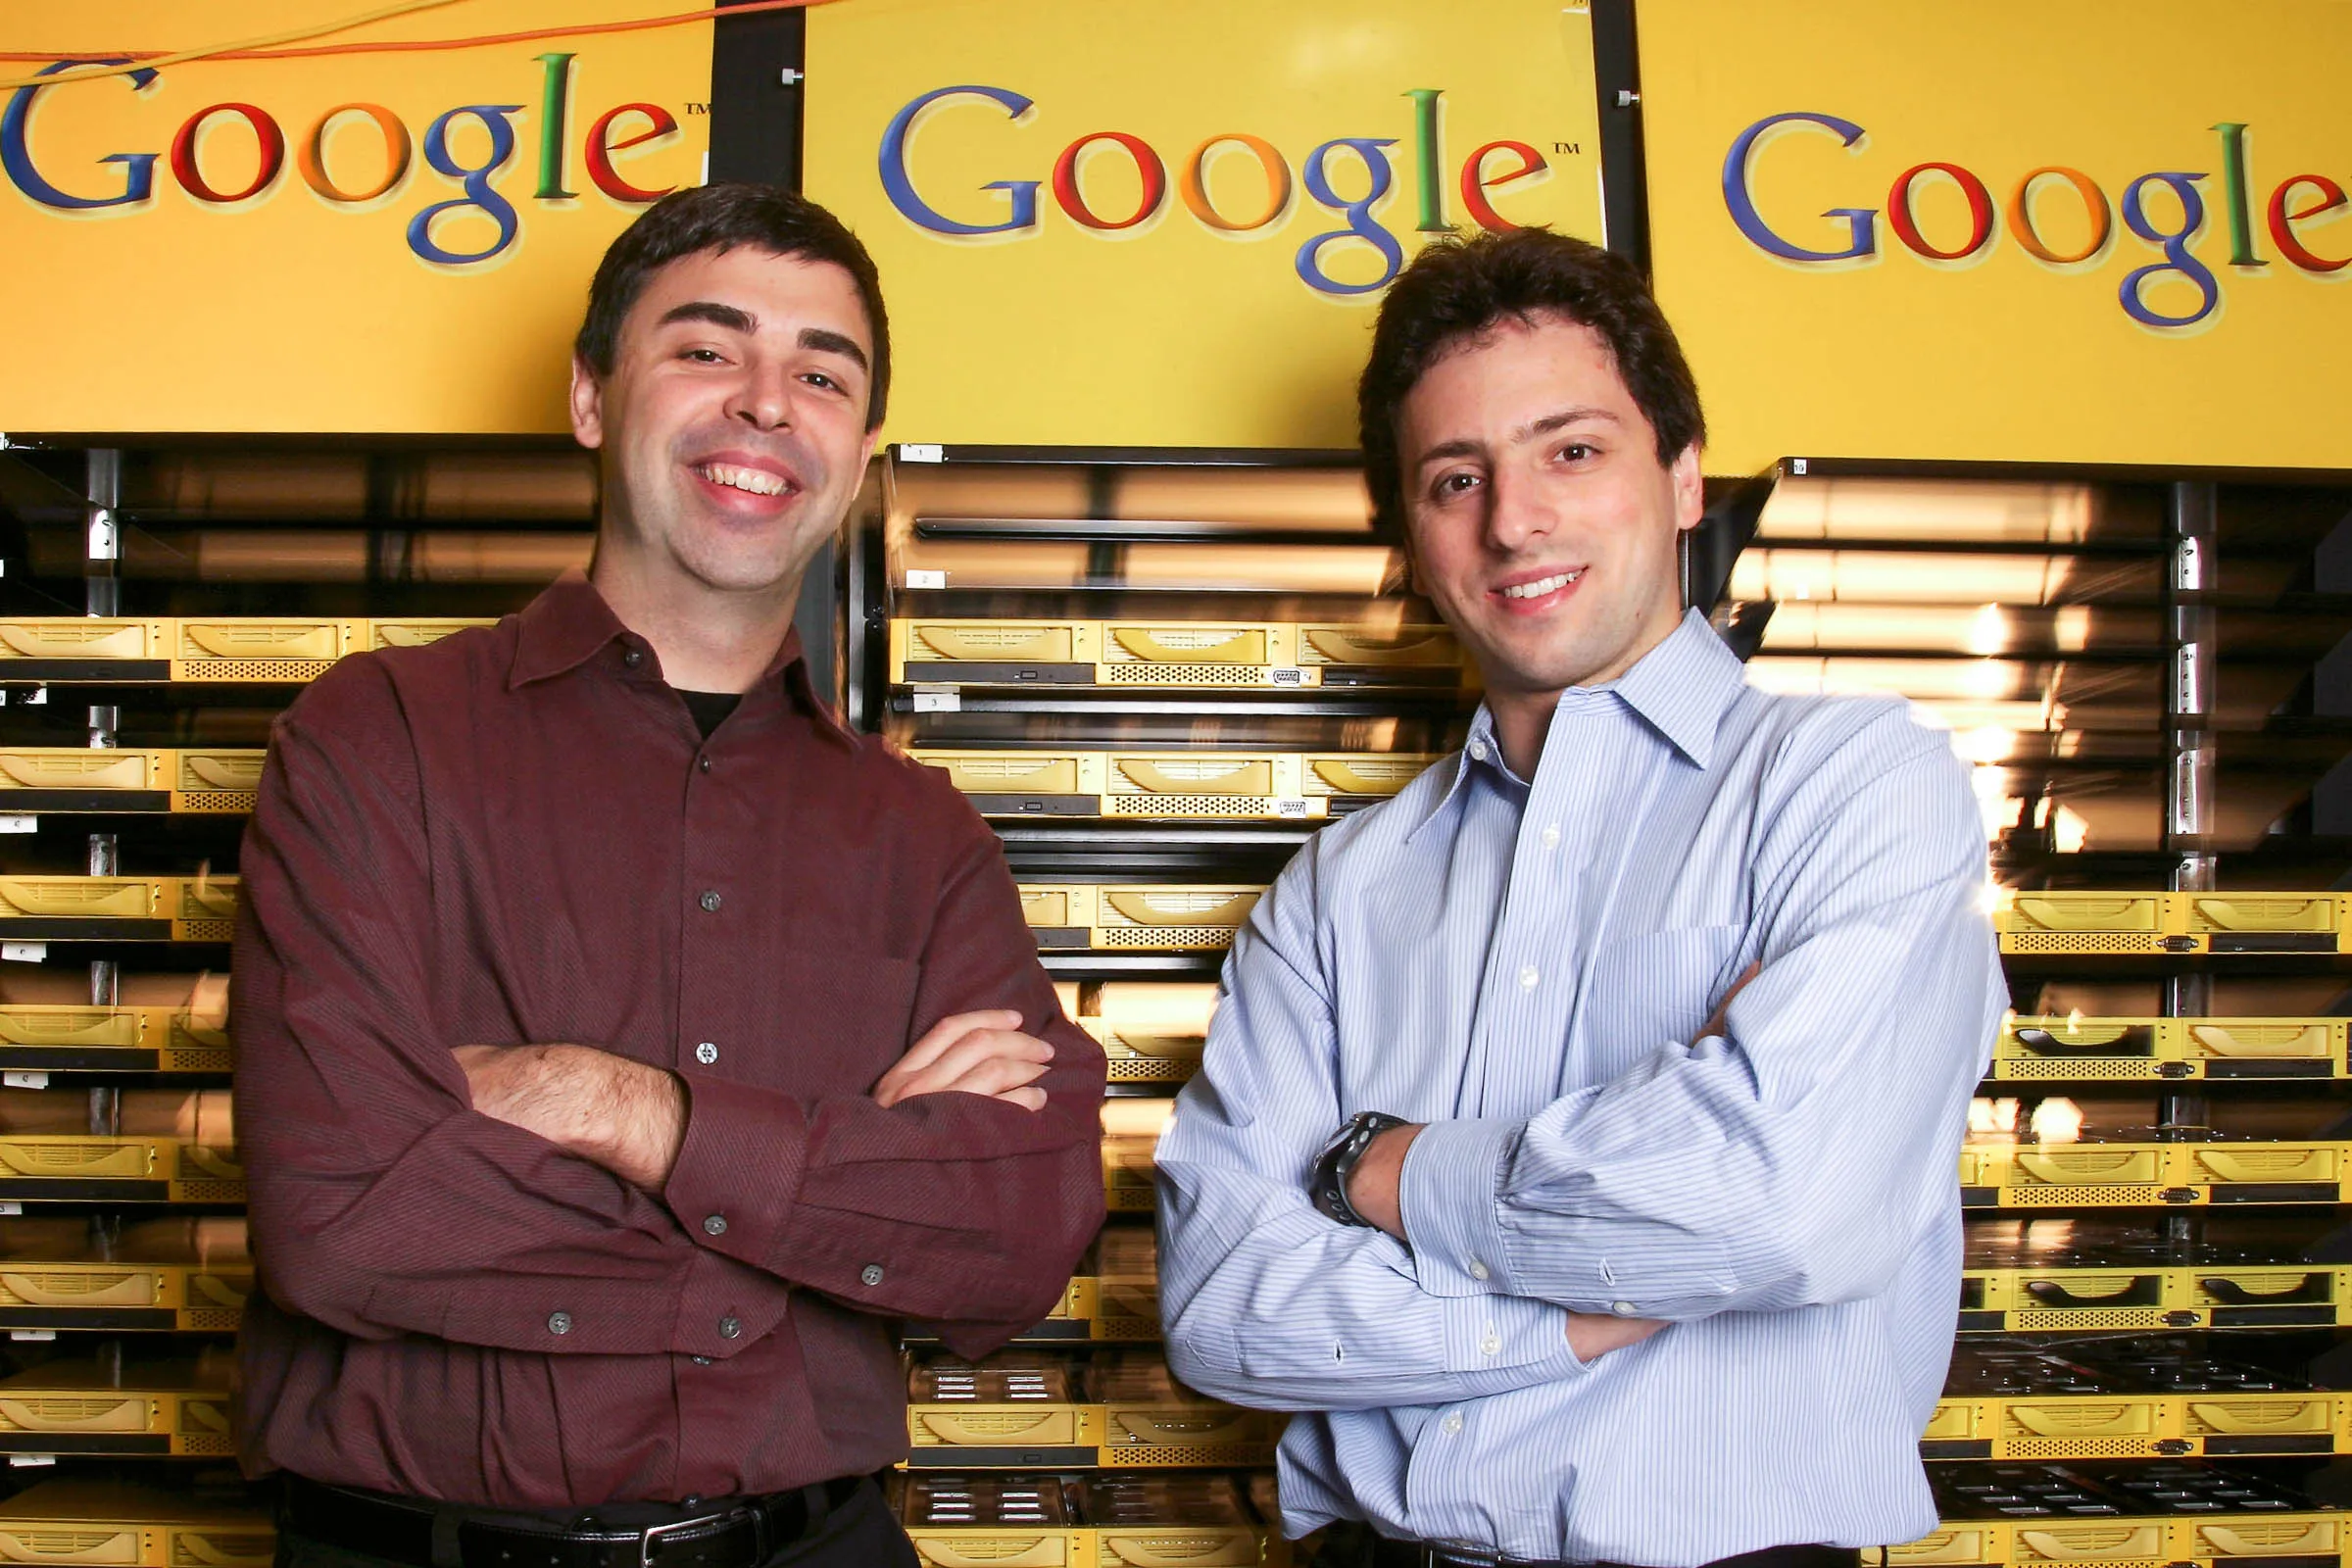 3. Larry Page and Sergey Brin - Founders of Google 🔍💡